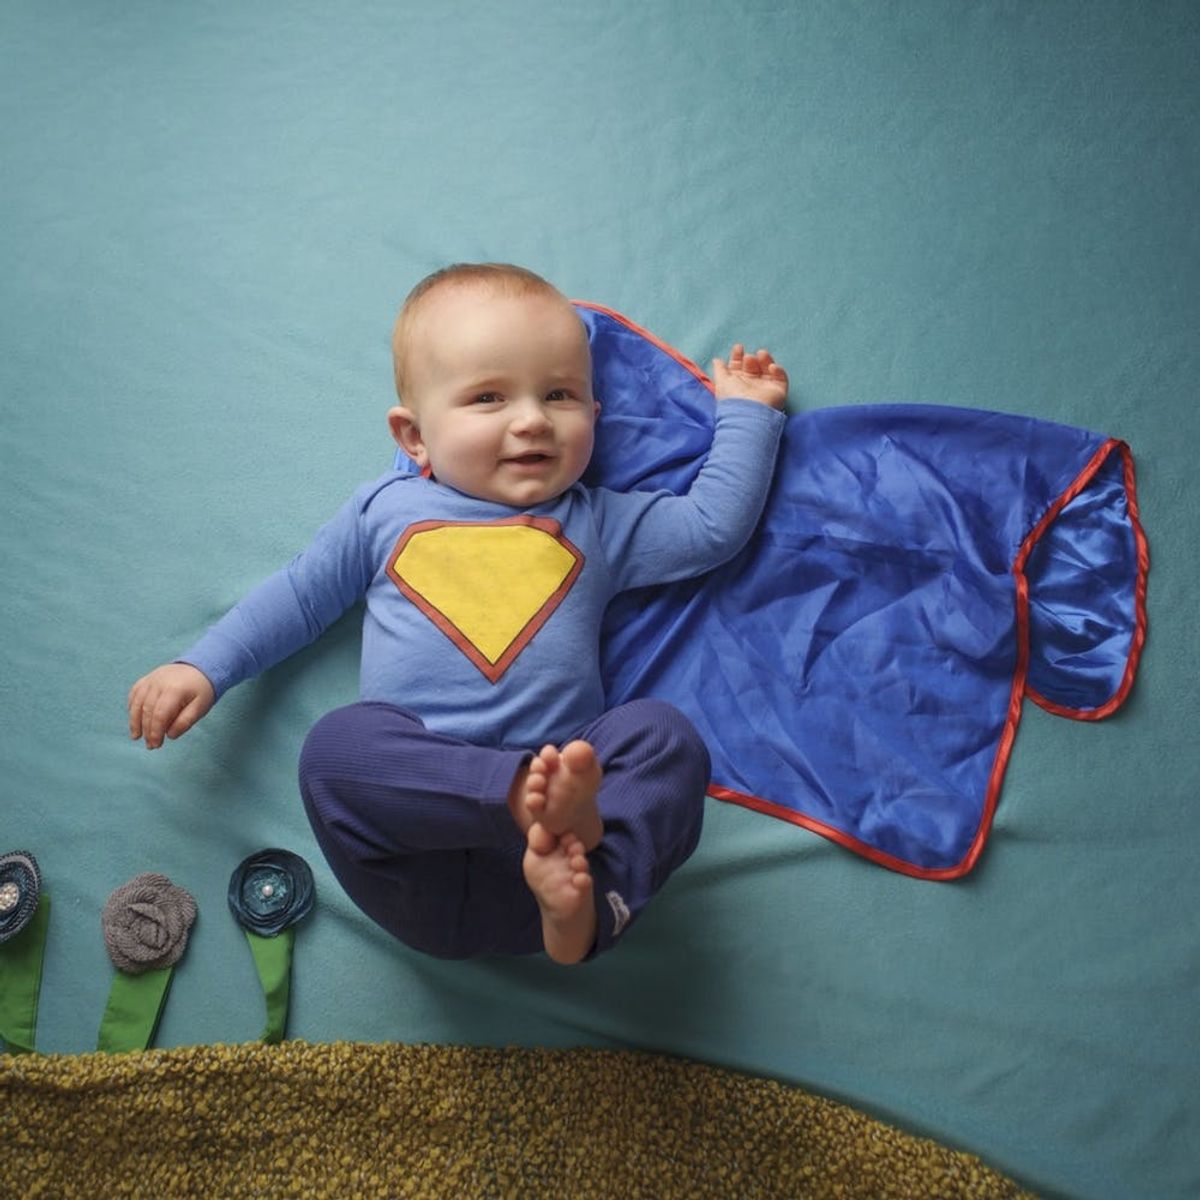 8 Daredevil Baby Names for Your Little Superhero